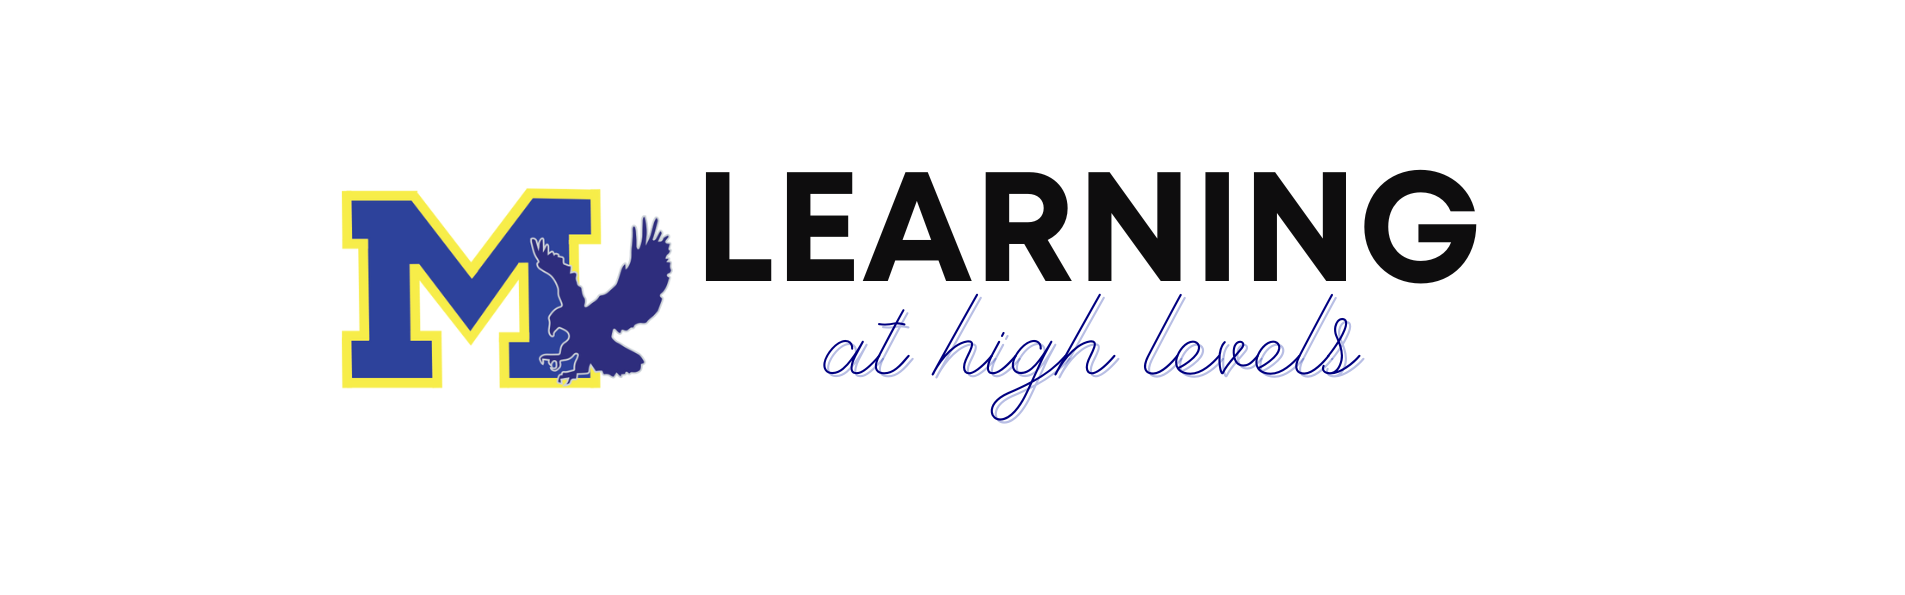 learning at high levels